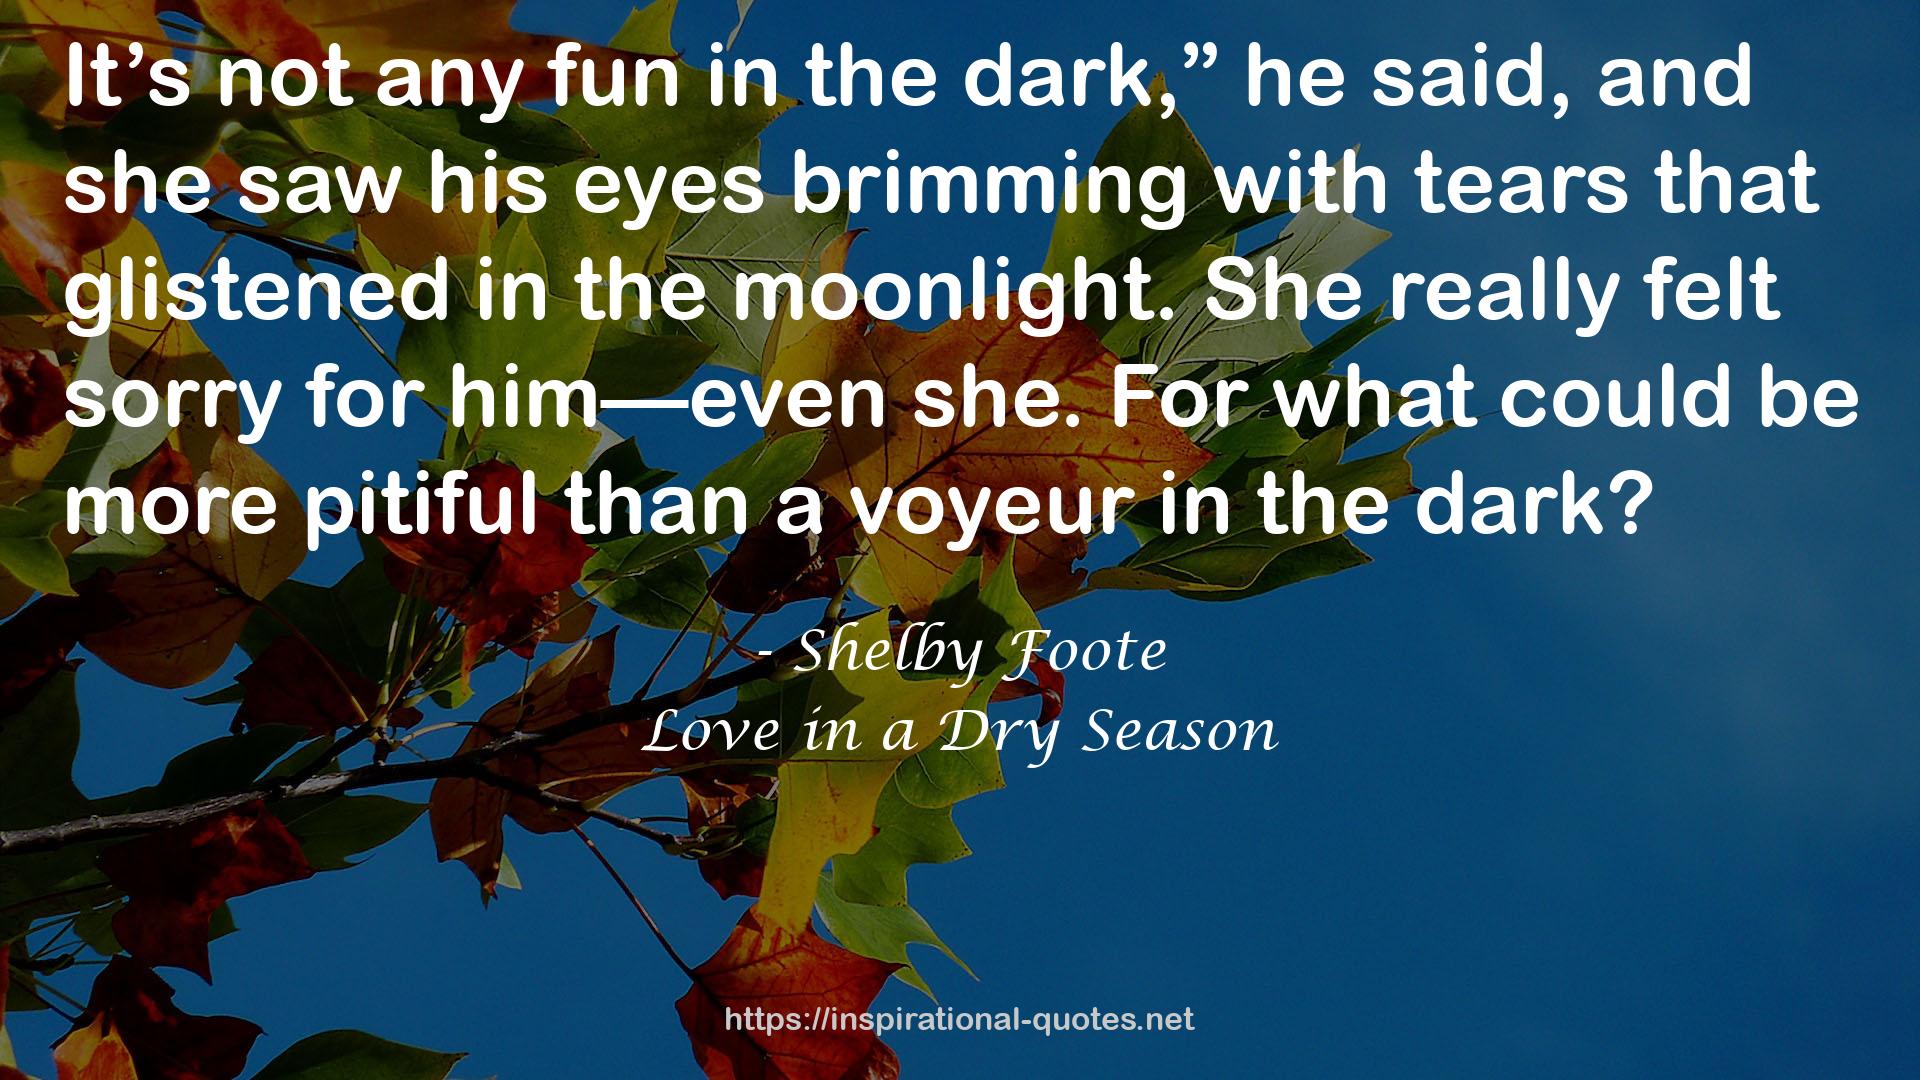 Love in a Dry Season QUOTES